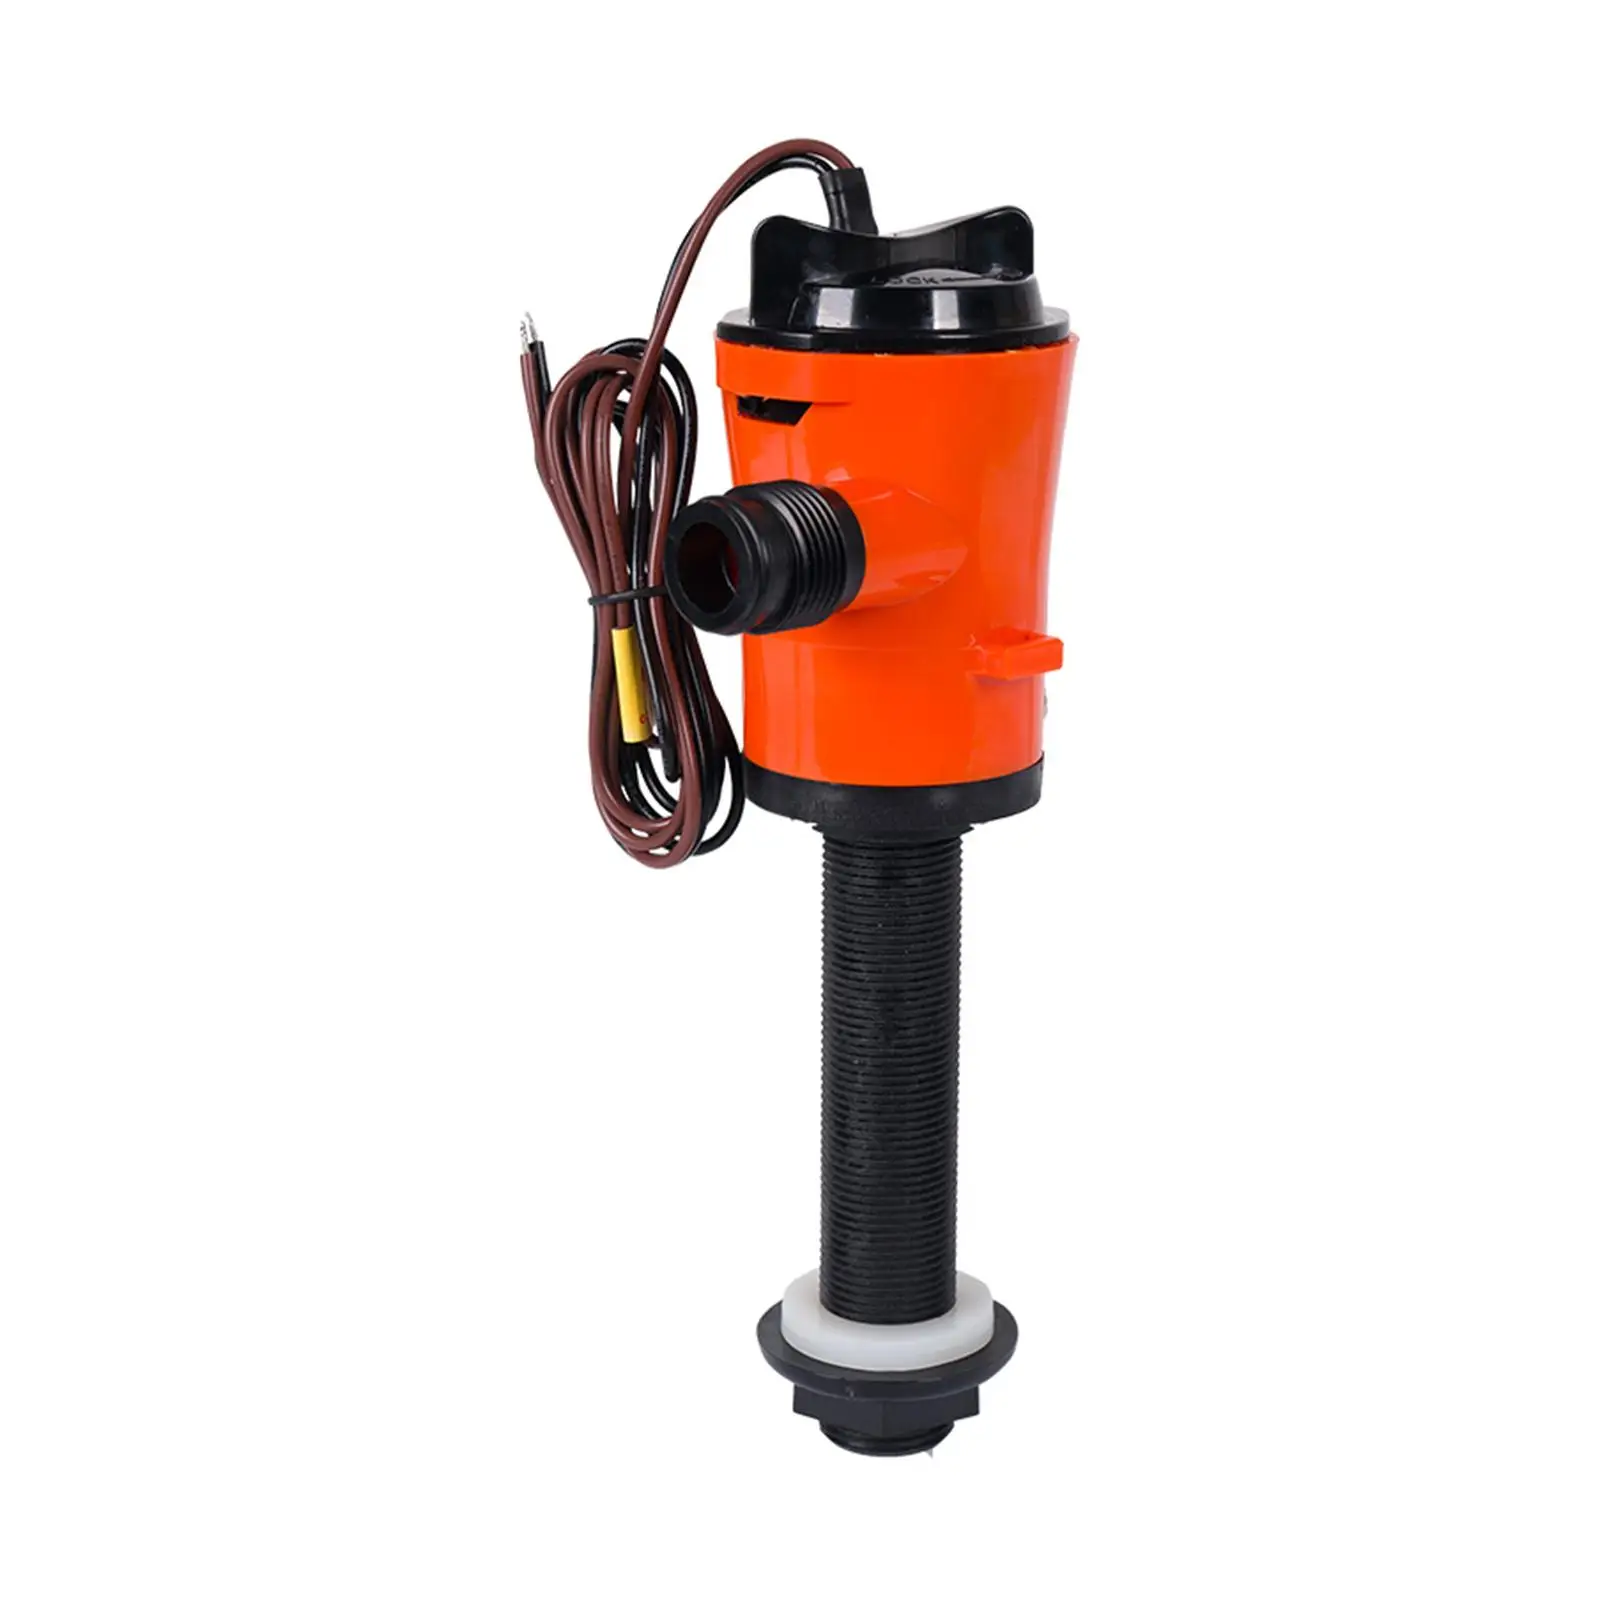 Livewell Pump Repair Parts Submersible Boat Tools Easy to Clean Removable Direct Replaces Easy Installation Boat Bilge Pump